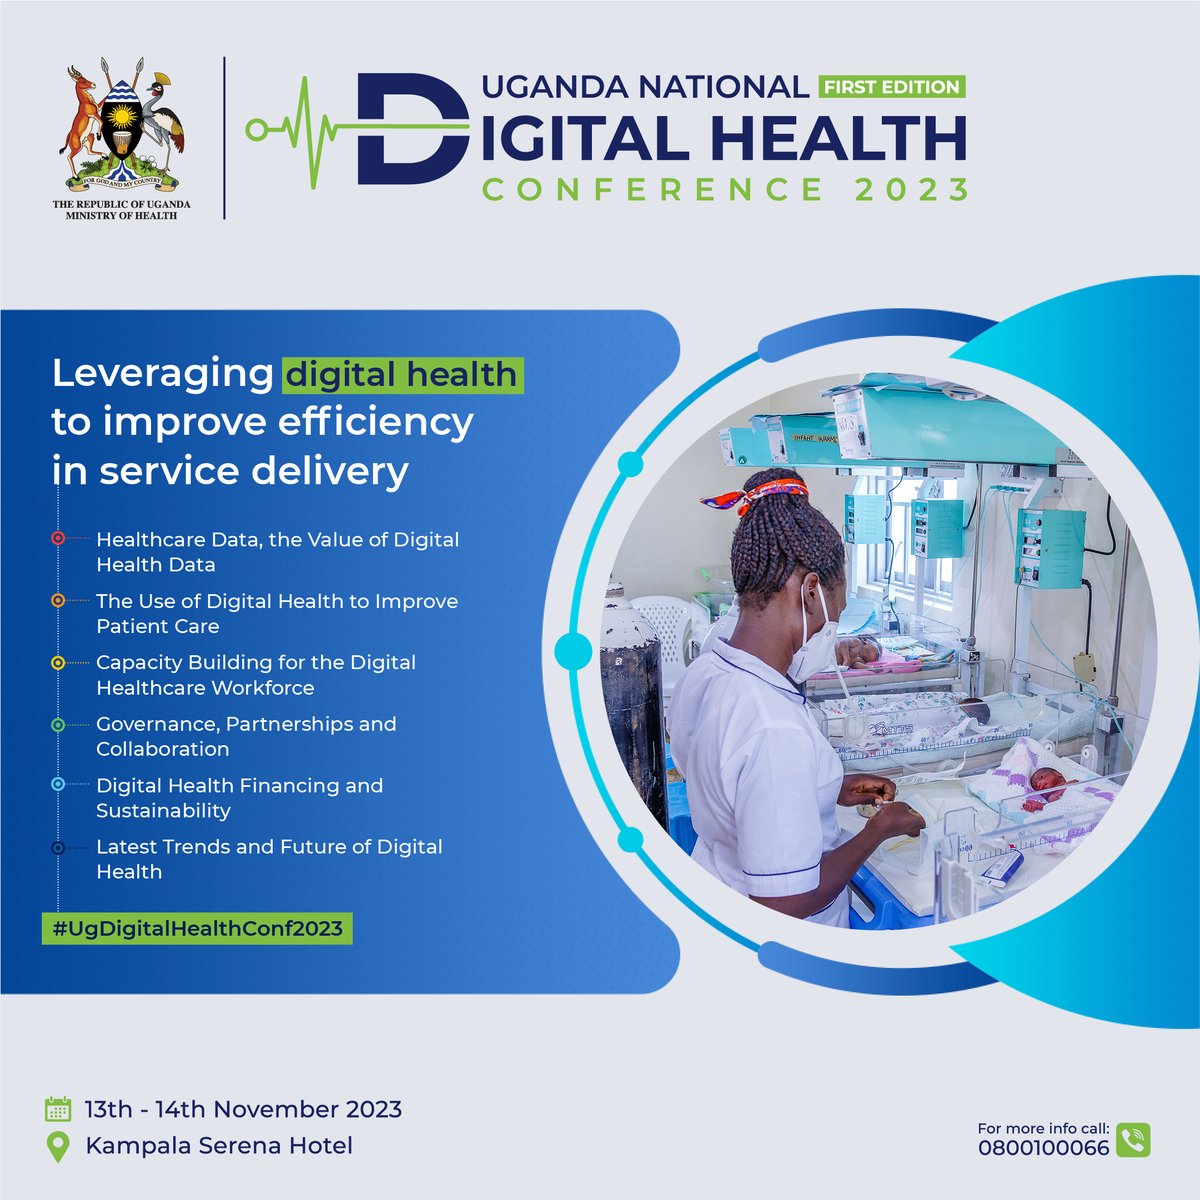 Digital technologies have become essential for global health and health service delivery. Join the @MinofHealthUG for a two-day conference (13th to 14 Nov 2023), the first of its kind happening at Kampala Serena Hotel #UgDigitalHealthConf2023